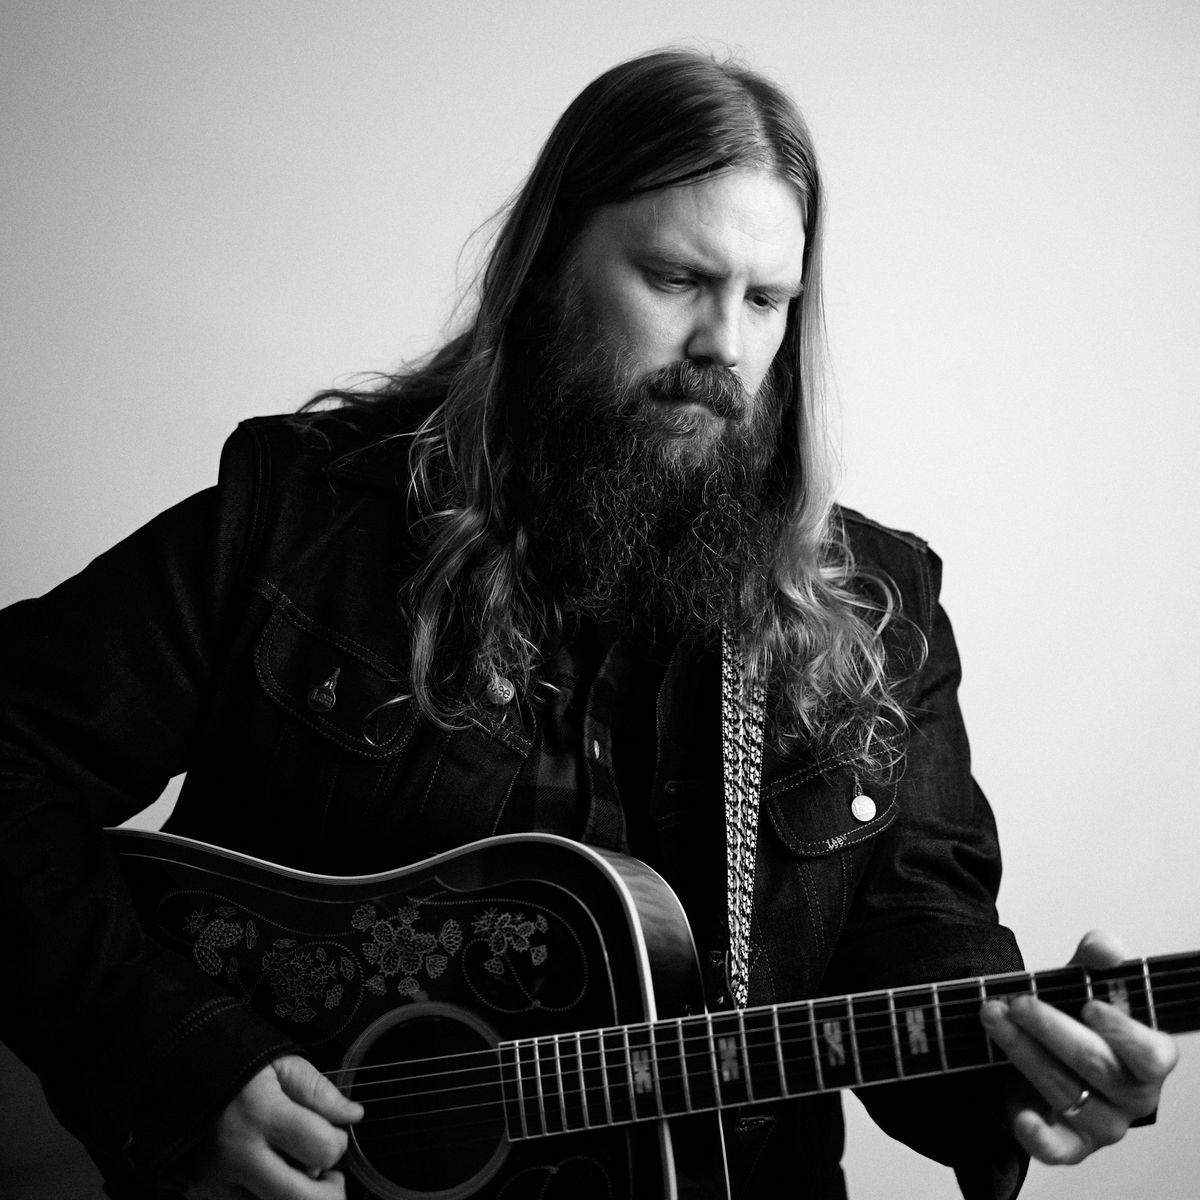 Chris Stapleton on 'Starting Over' and Country Music's Image